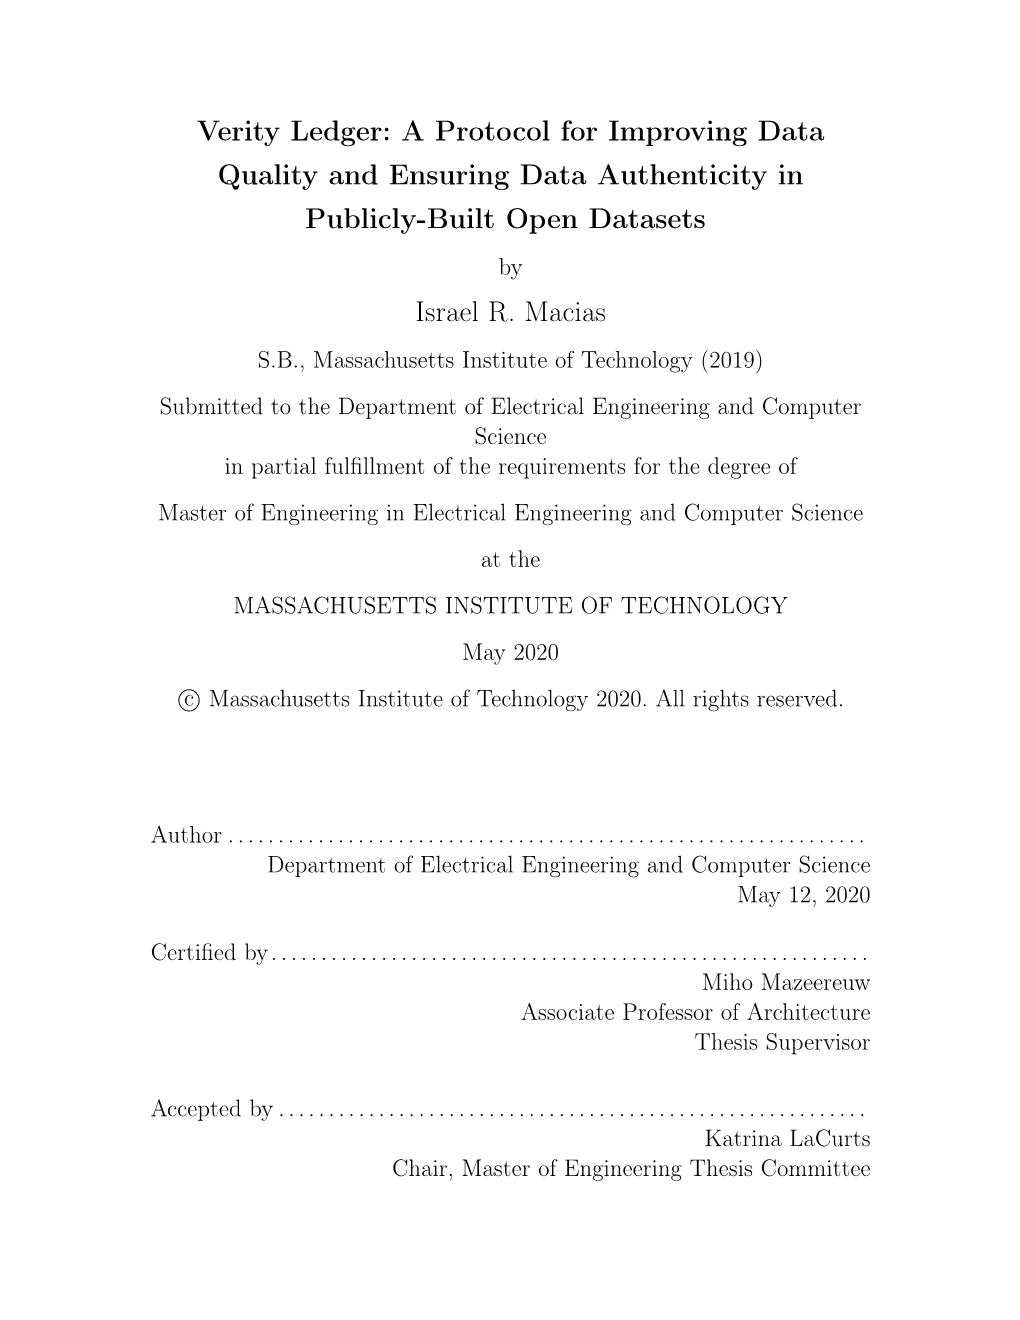 Verity Ledger: a Protocol for Improving Data Quality and Ensuring Data Authenticity in Publicly-Built Open Datasets by Israel R